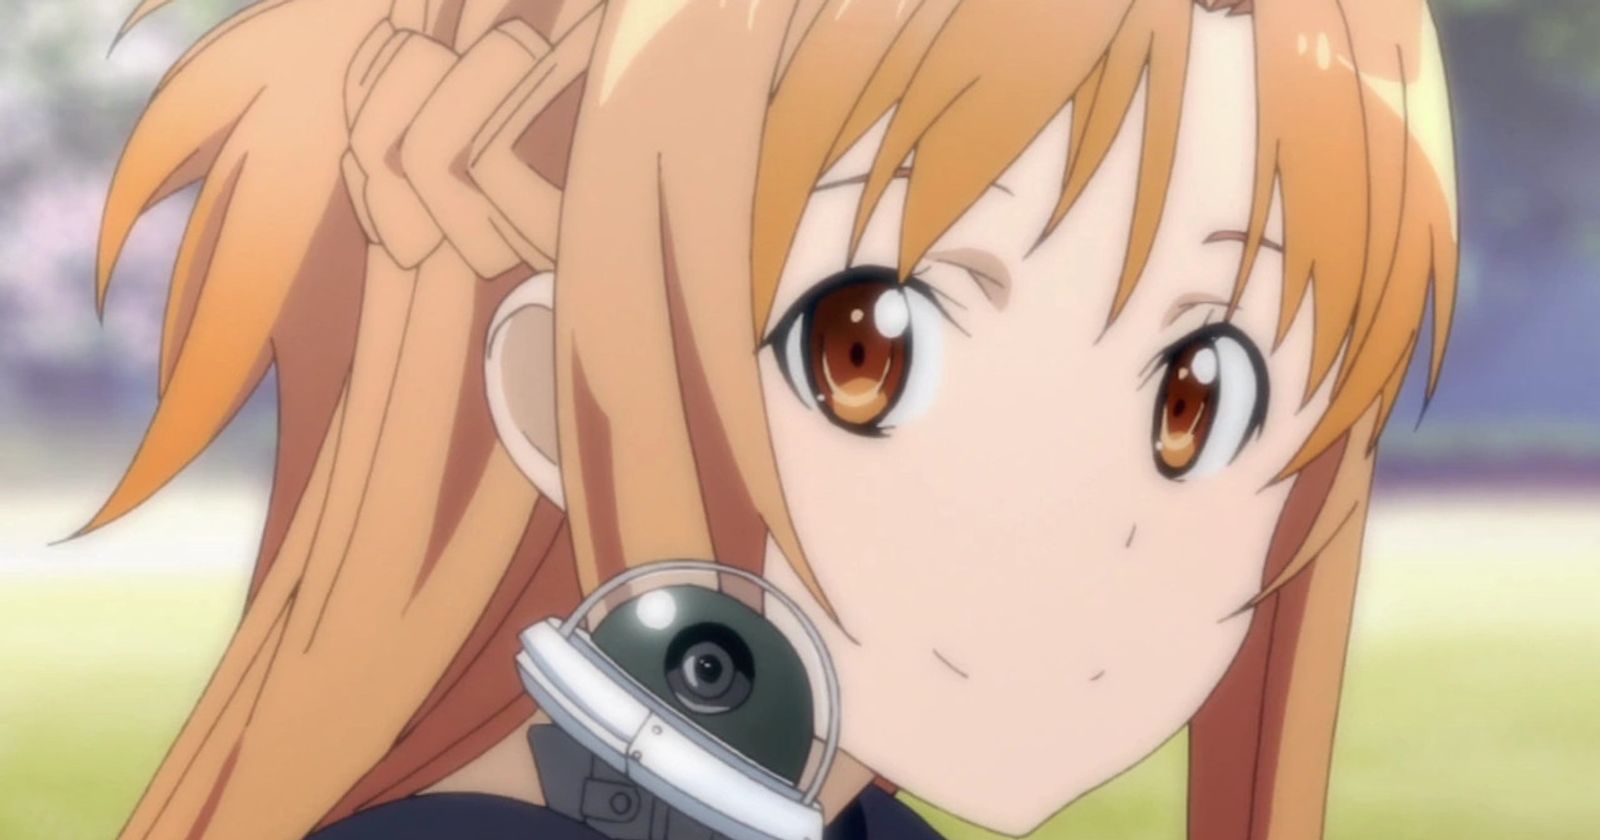 Sword Art Online Is Set in 2022, and the New Year Is Freaking Fans Out